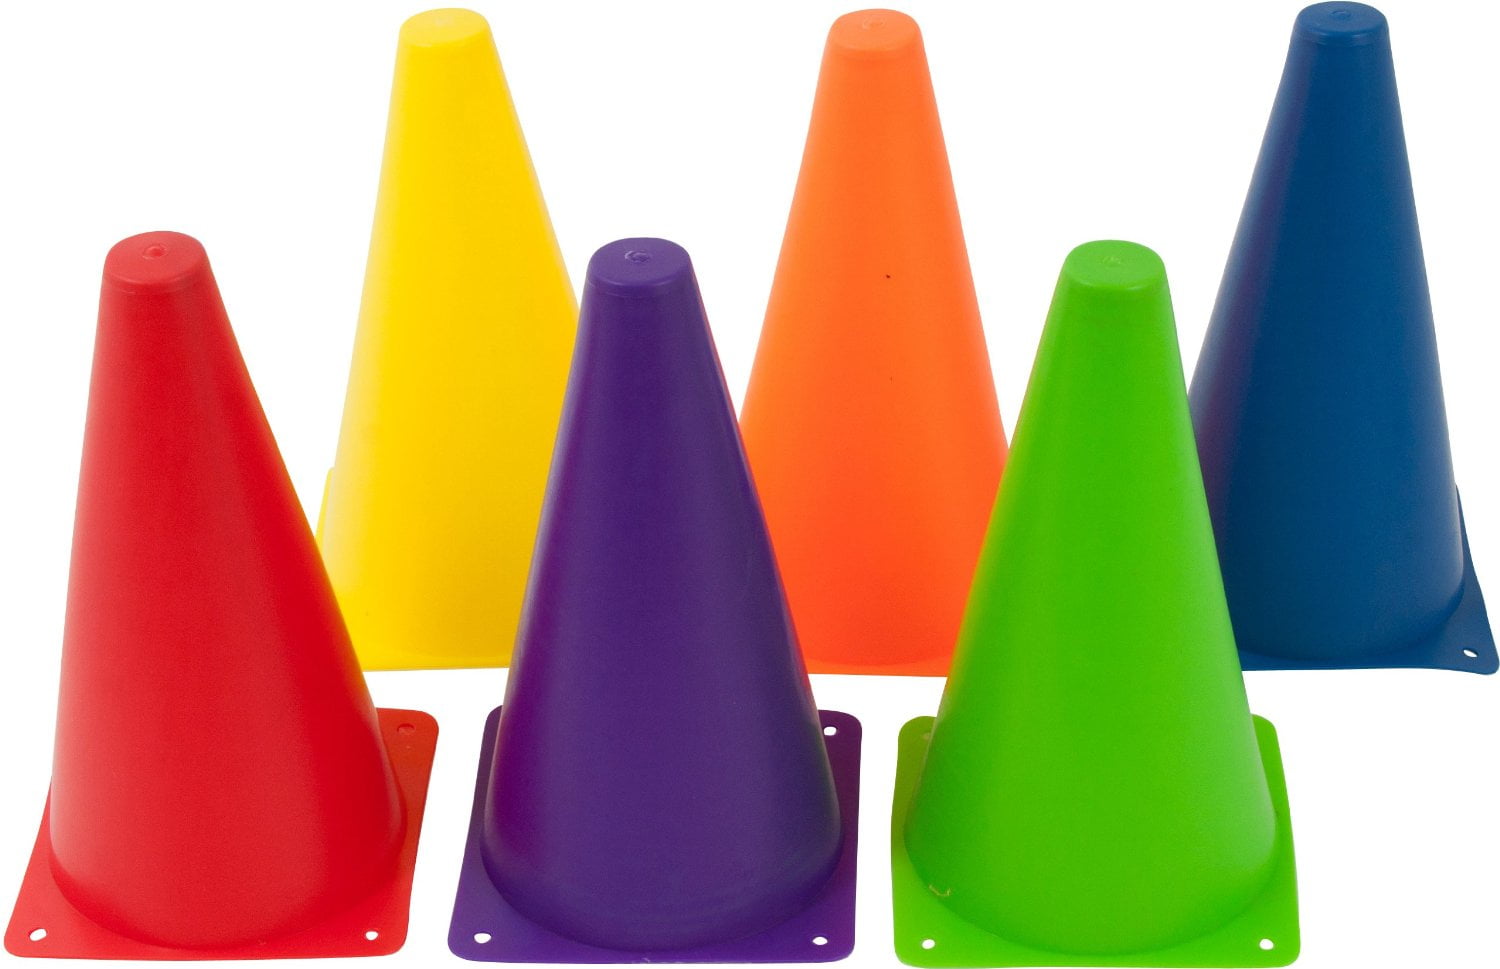 Traffic Cones Toy 7-Inch Plastic For Various Activities Perfect For Kid 6-Pack